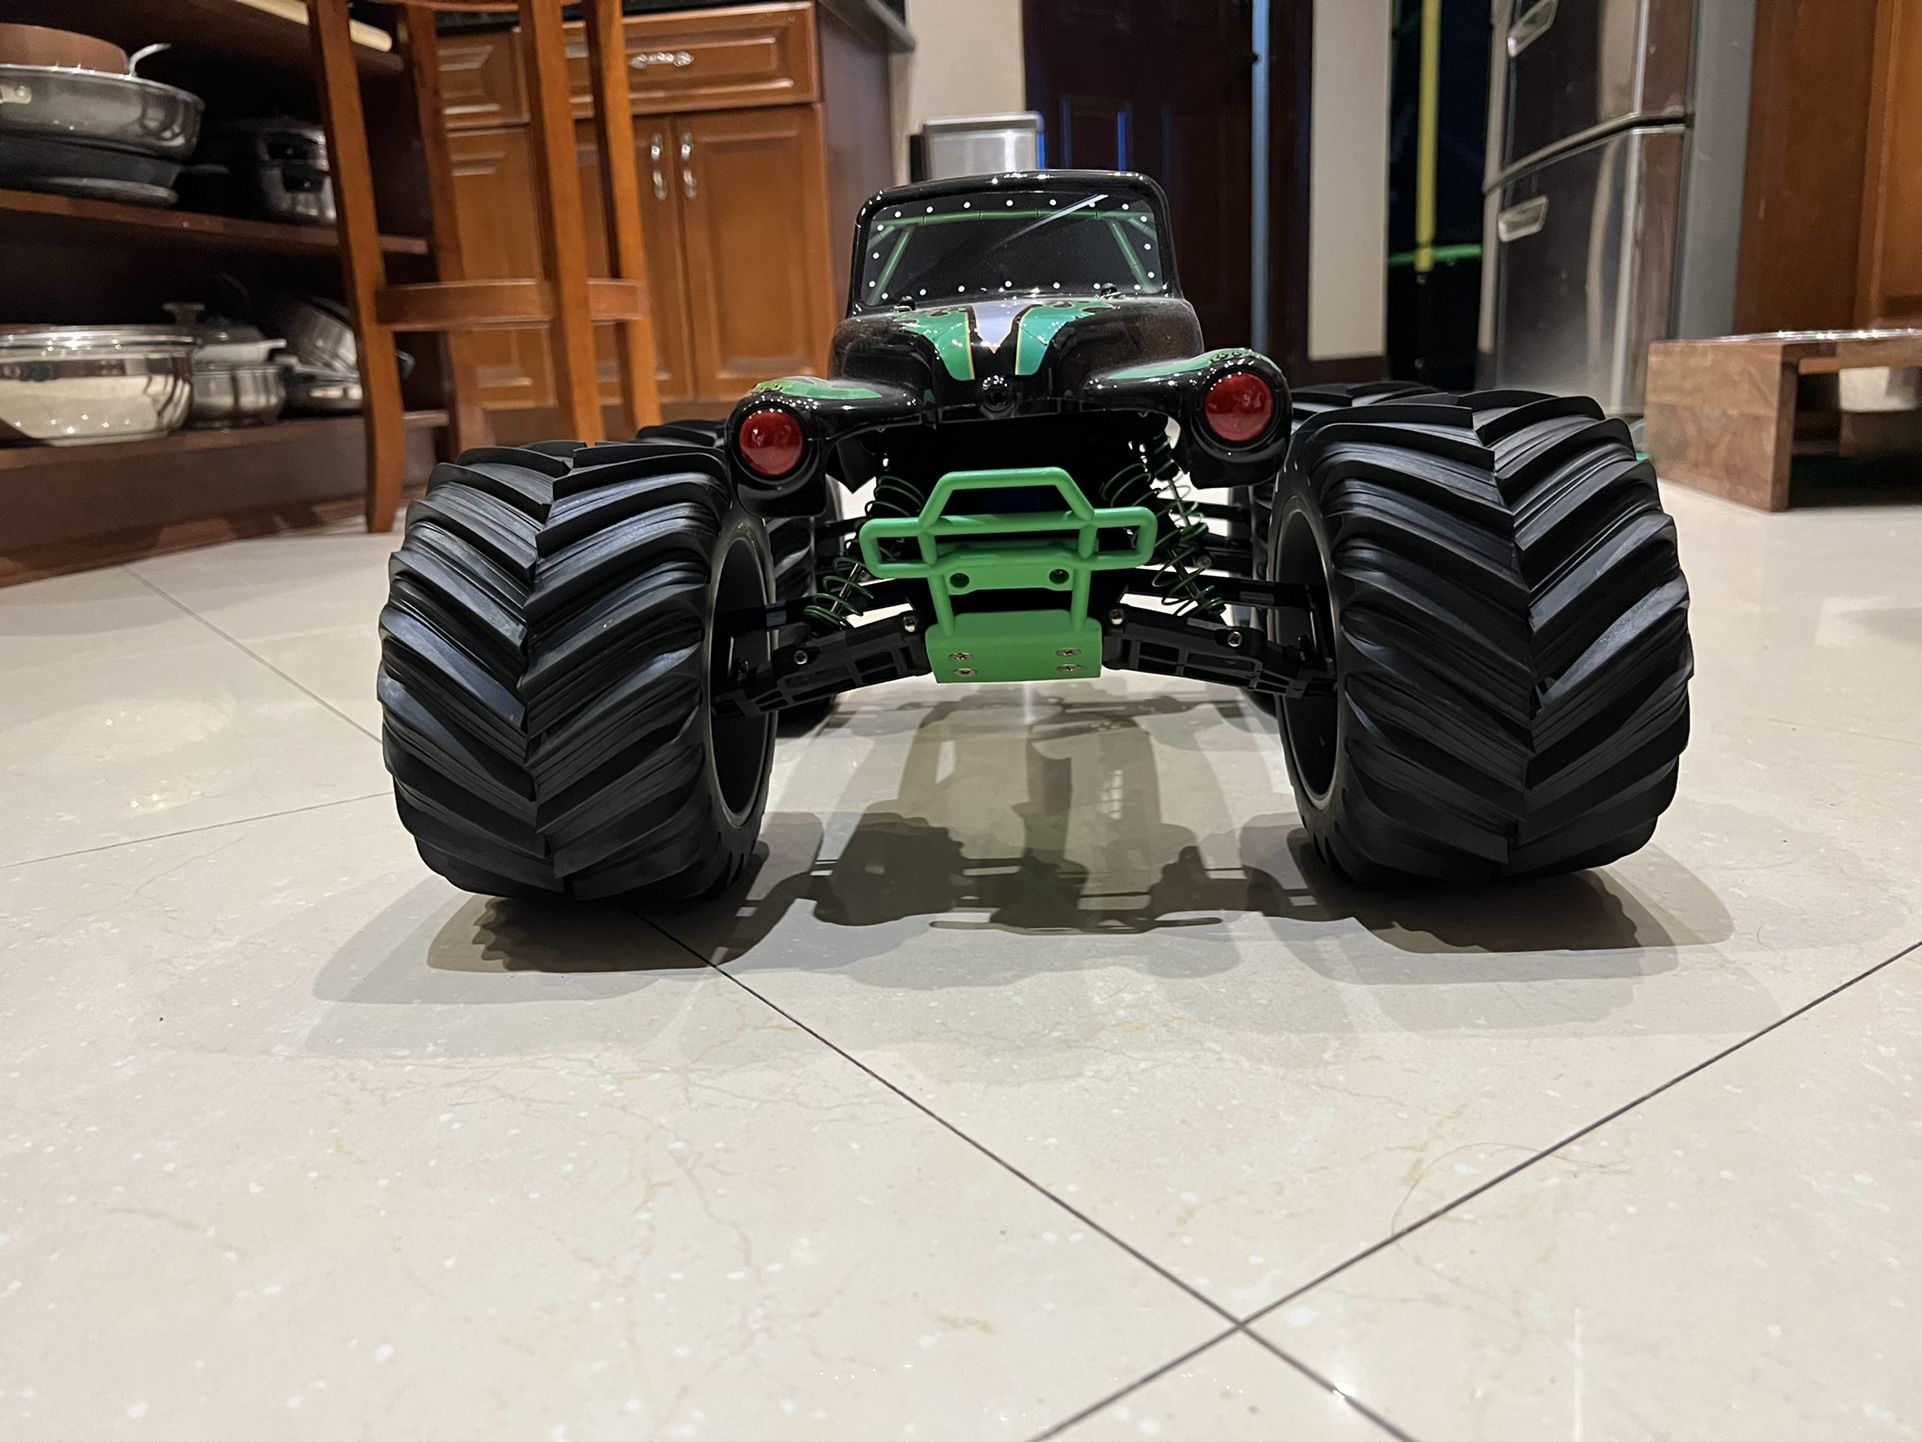 Traxxas Grave digger 1/10 Scale Rc Truck Like New ARTR